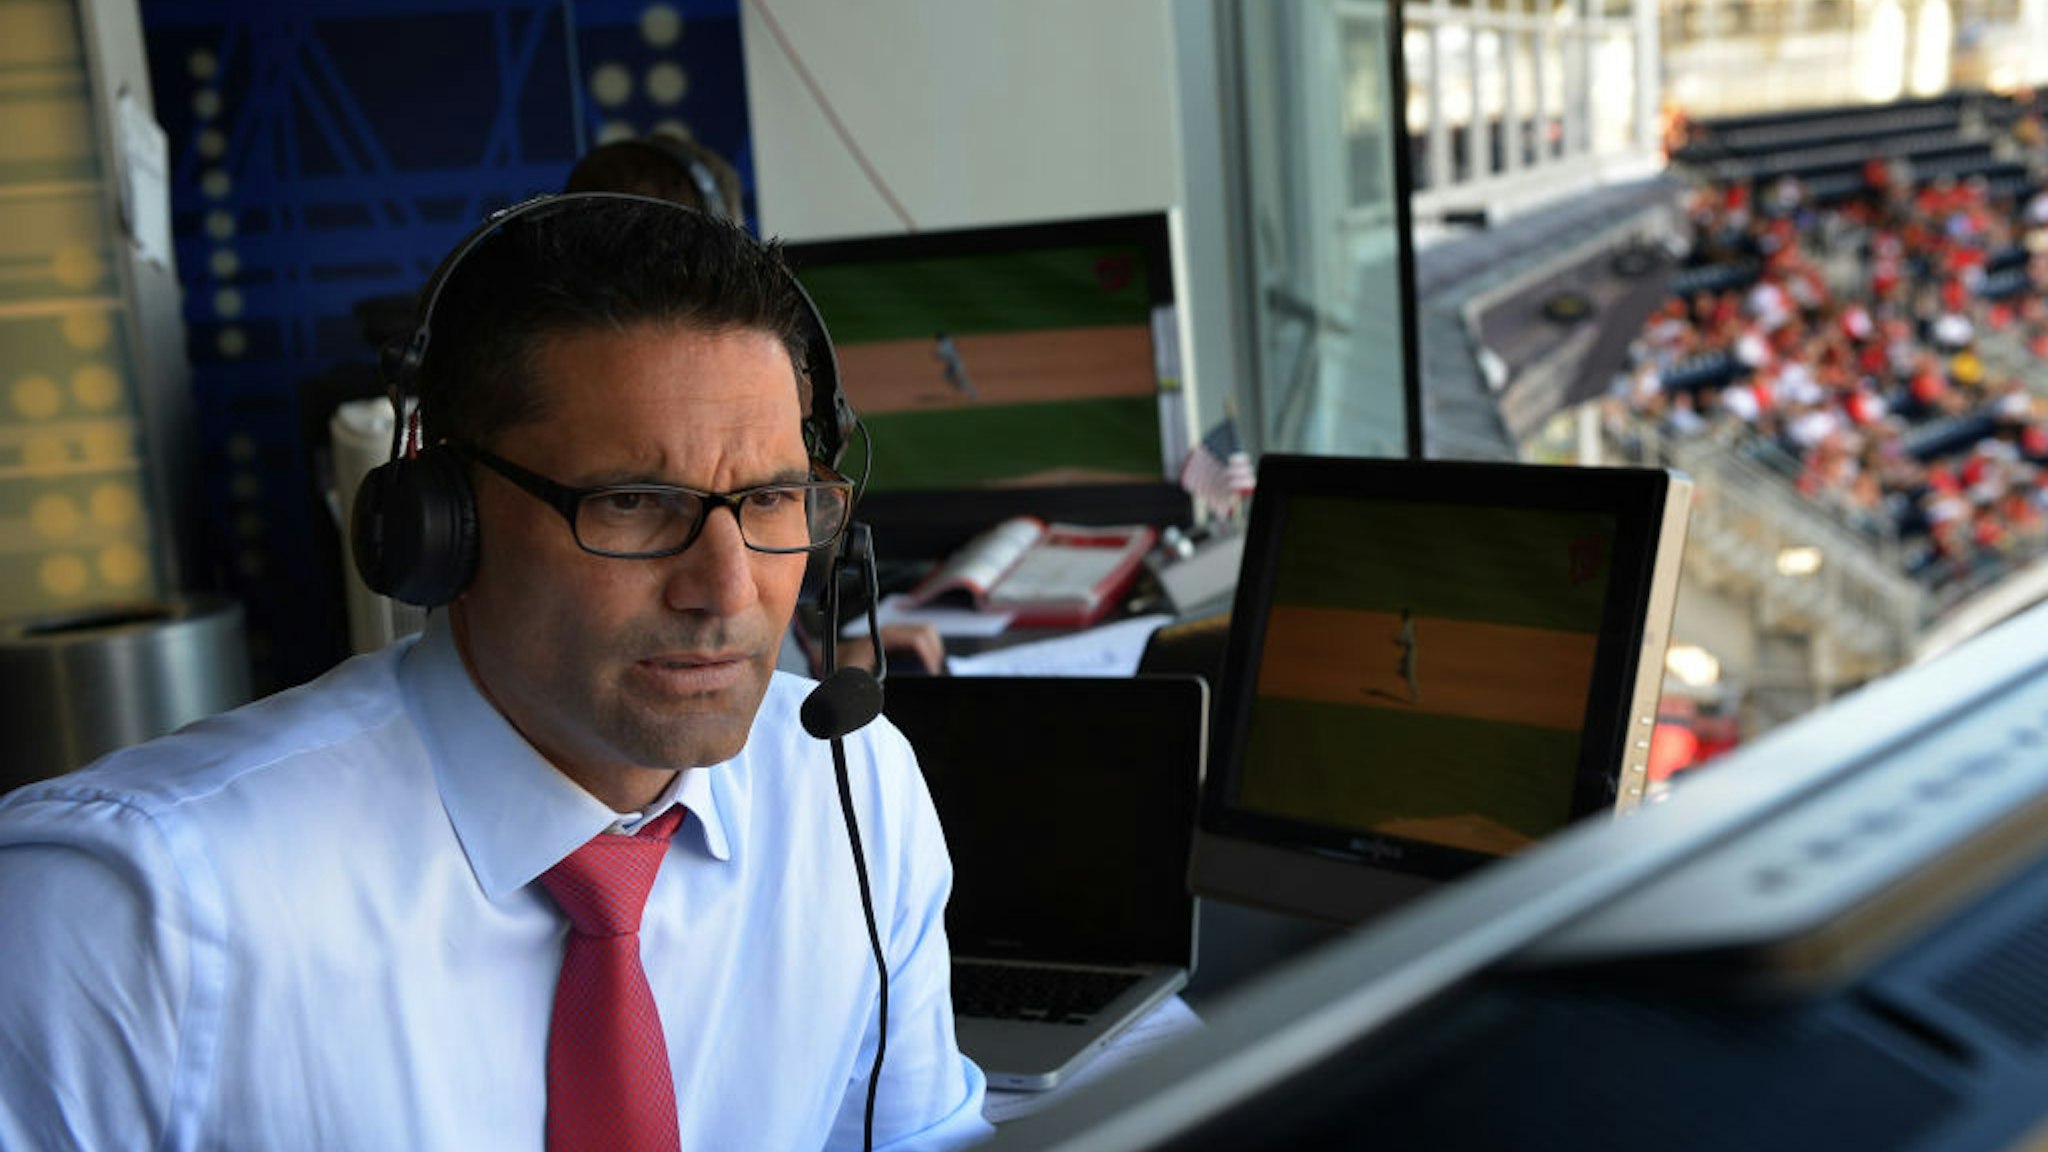 F.P. Santangelo, the color analyst for the Washington Nationals' telecasts on MASN, during the game on Sunday, September 9, 2012.